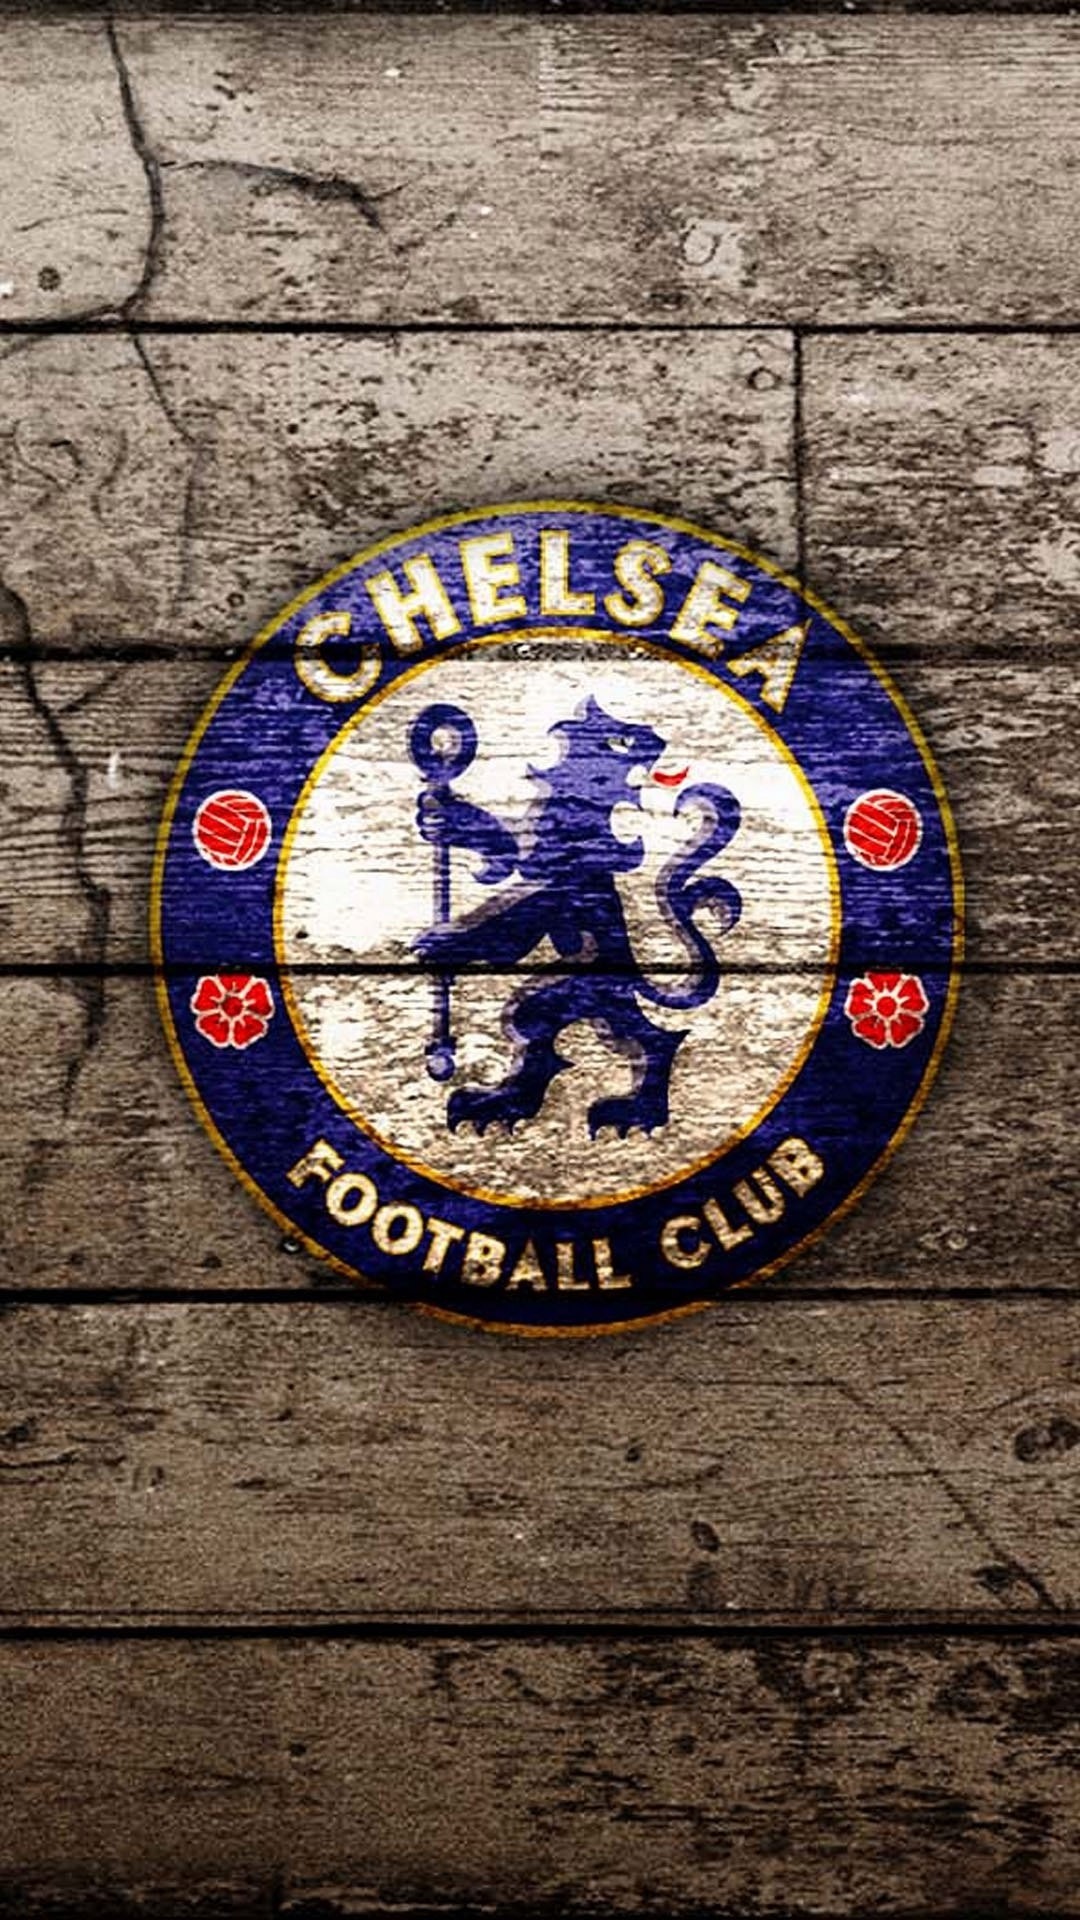 300+] Chelsea Fc Wallpapers | Wallpapers.com